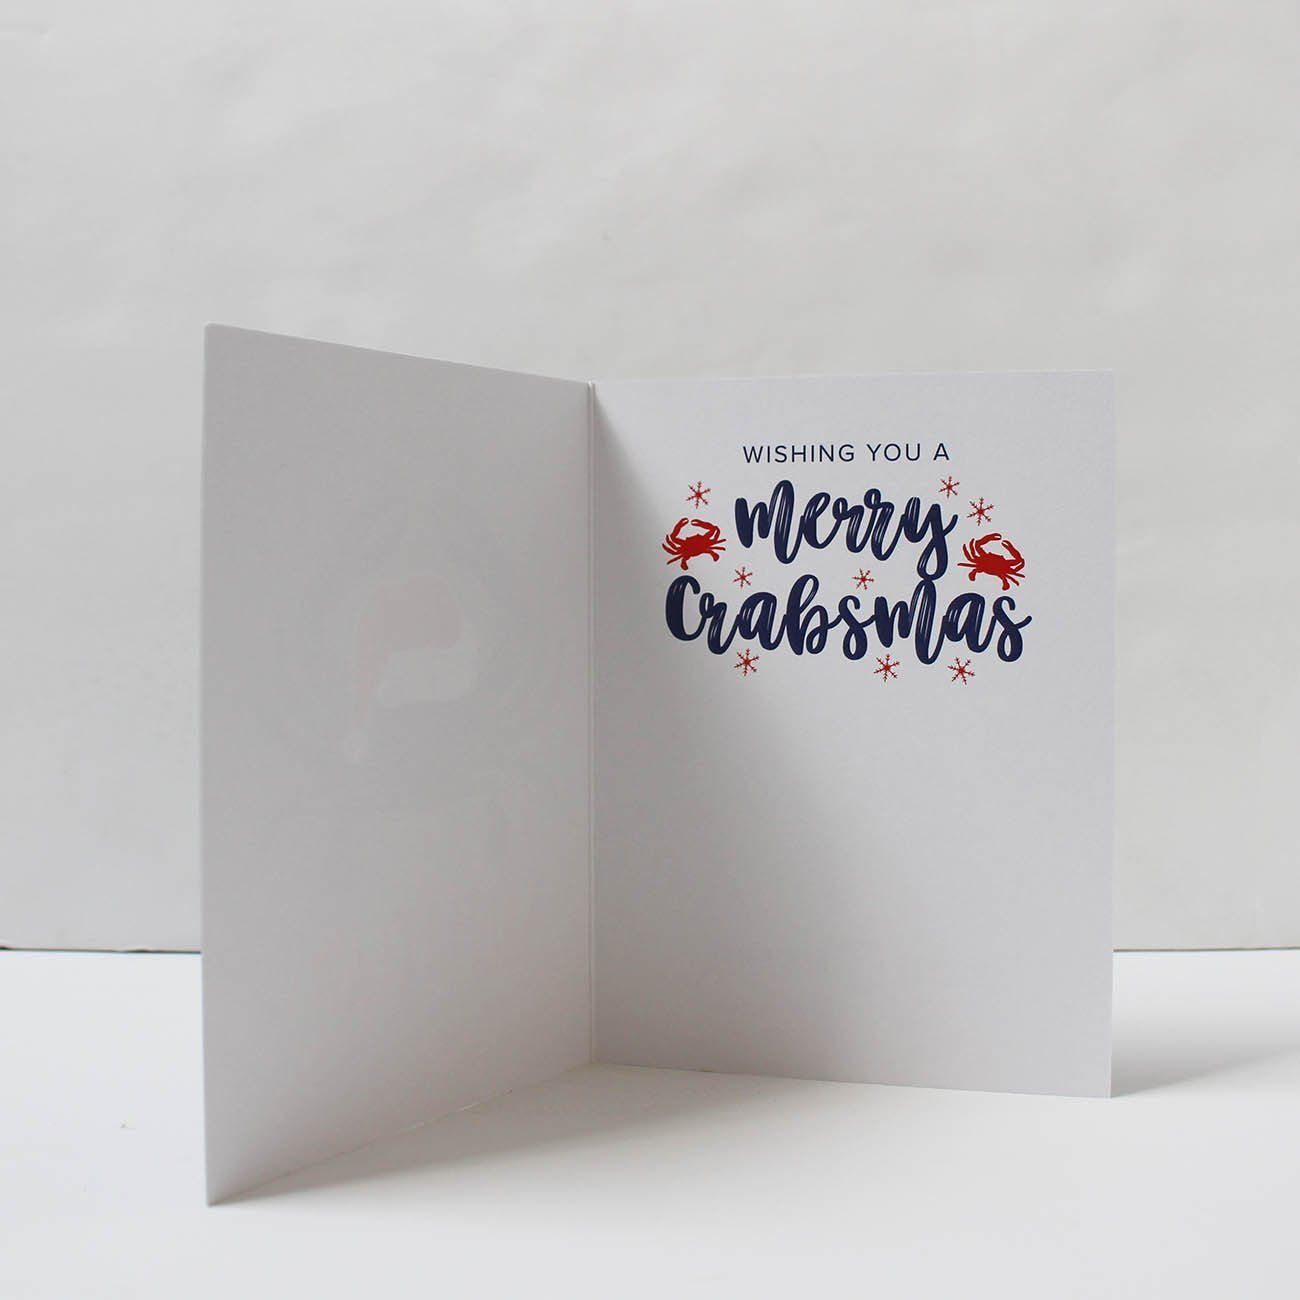 Santa Claws (Grey) / 8-Pack Christmas Cards - Route One Apparel